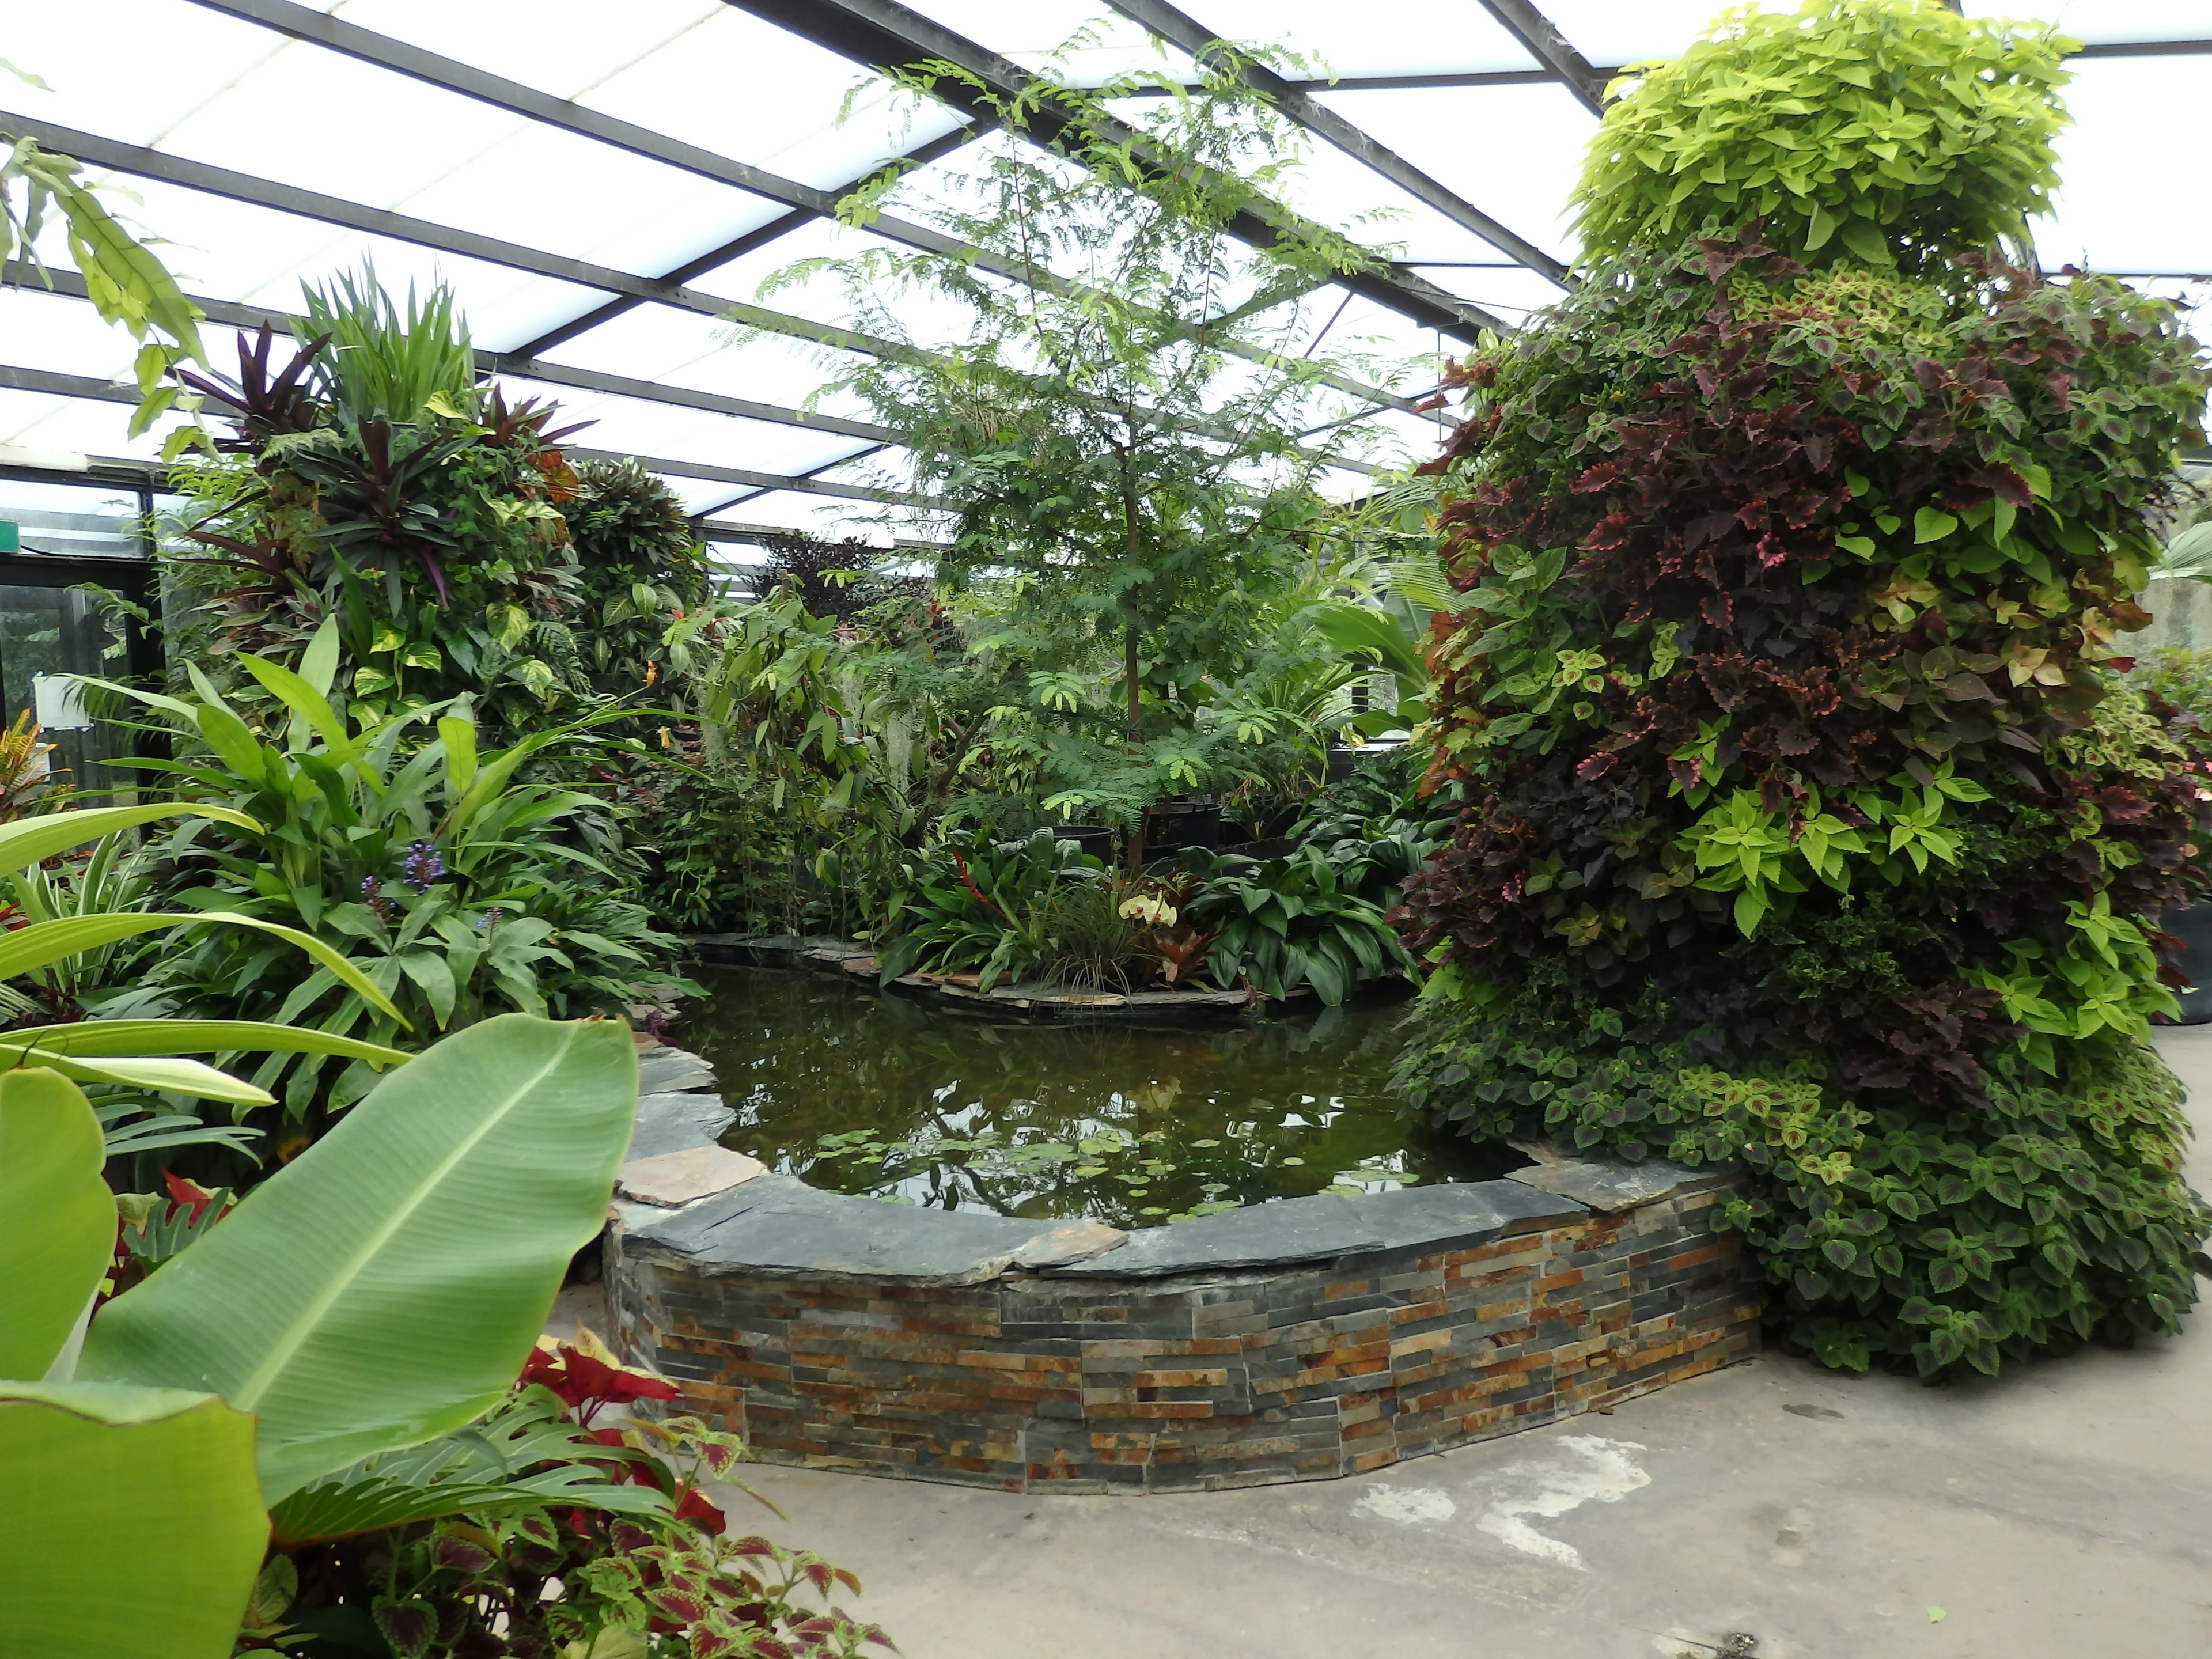 Plants and pond in the Conservatory at Geelong Botanic Gardens, Victoria